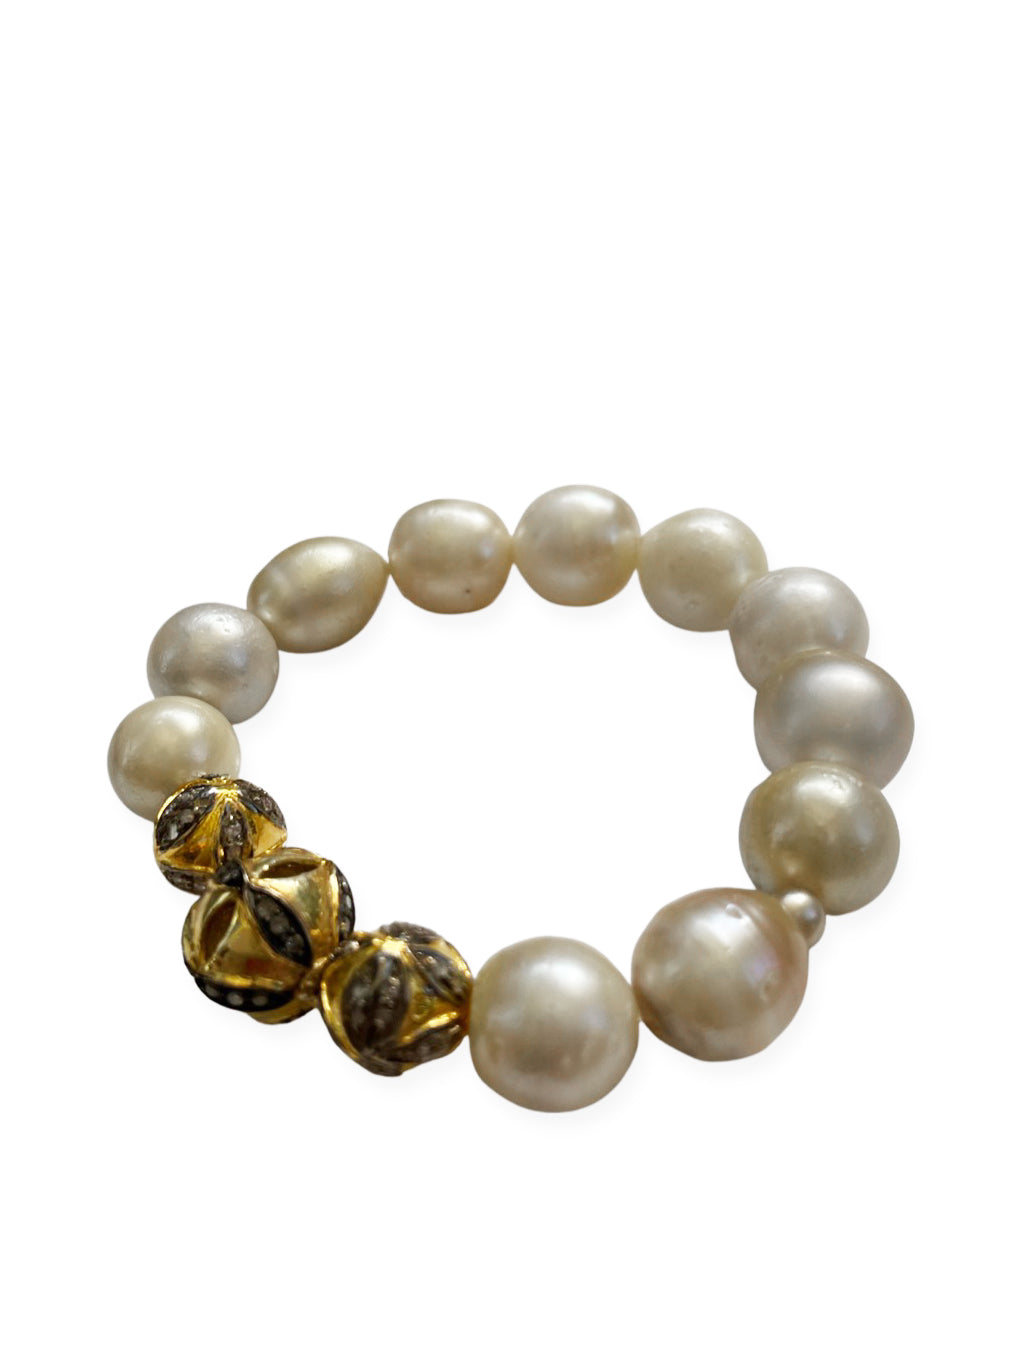 Golden South Sea Pearls with Three Pave Diamond Mixed Metal Beads